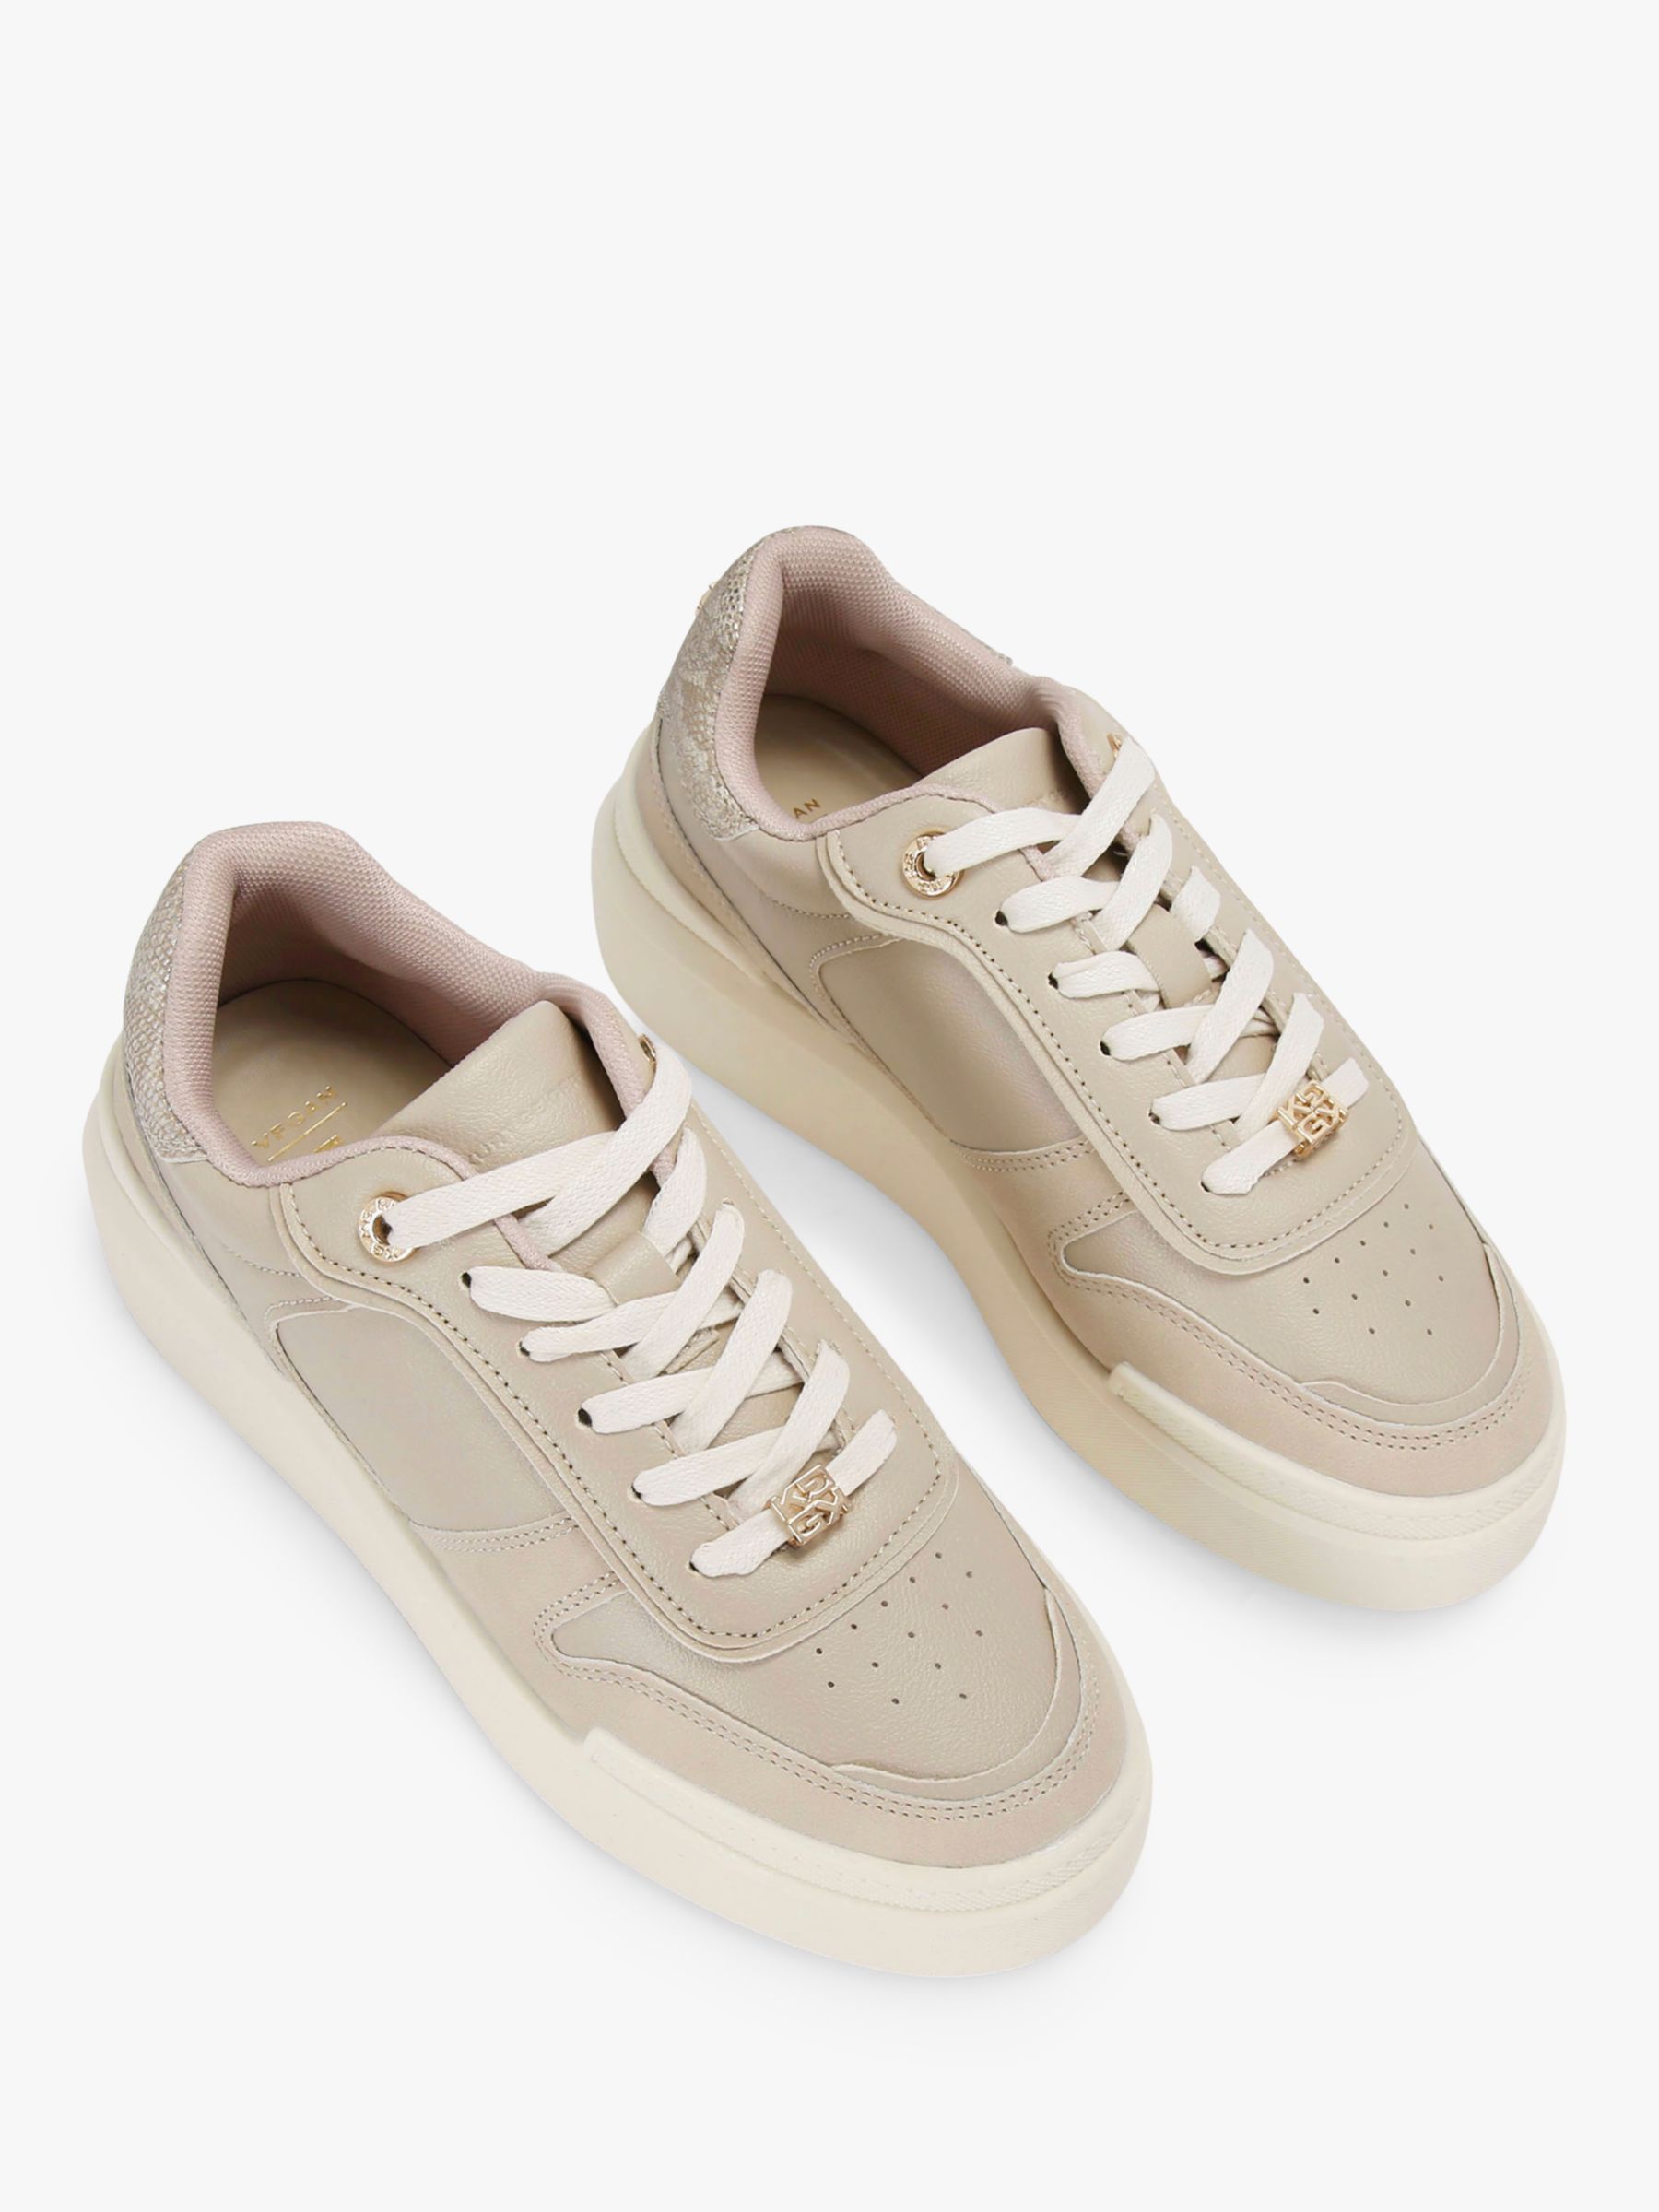 Buy KG Kurt Geiger Luz Chunky Sole Trainers, Natural Taupe Online at johnlewis.com